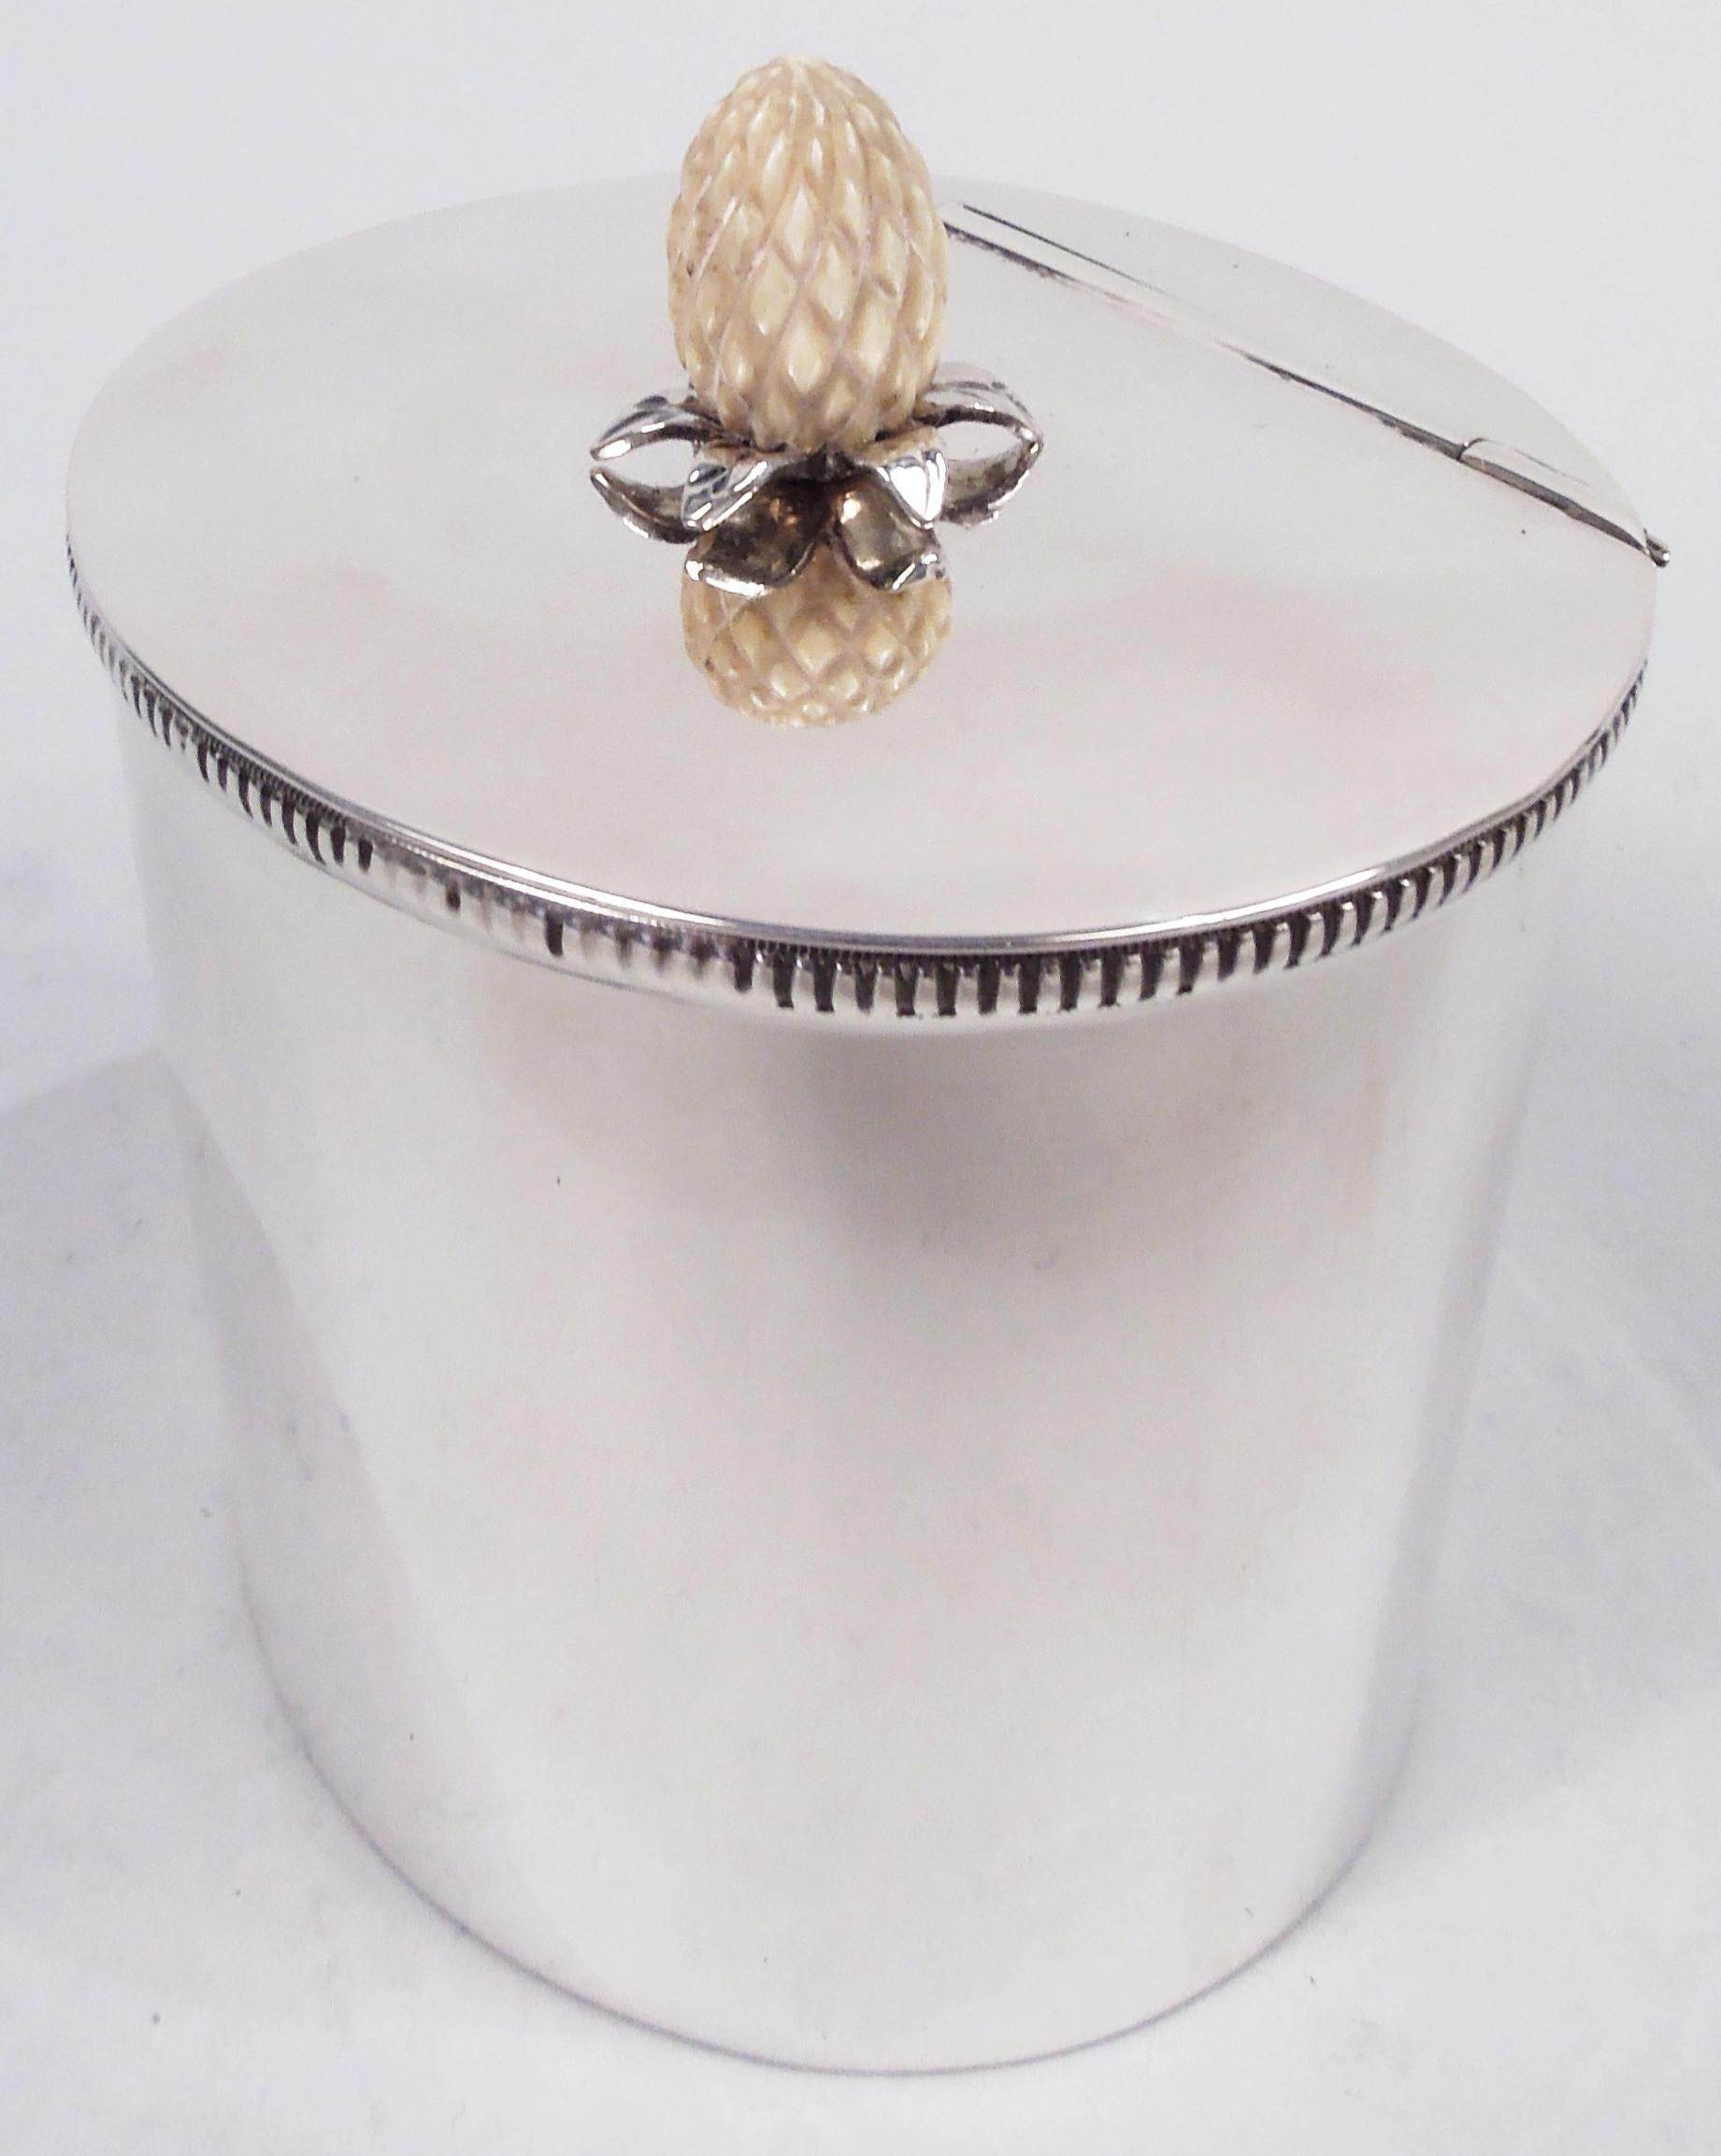 Midcentury Modern sterling silver tea caddy. Oval with straight sides and gadrooned and ribbed mouth rim. Cover flat and hinged with carved pineapple finial on tooled silver leaf mounts. Spare elegance that suggests the Danish influence. Marked